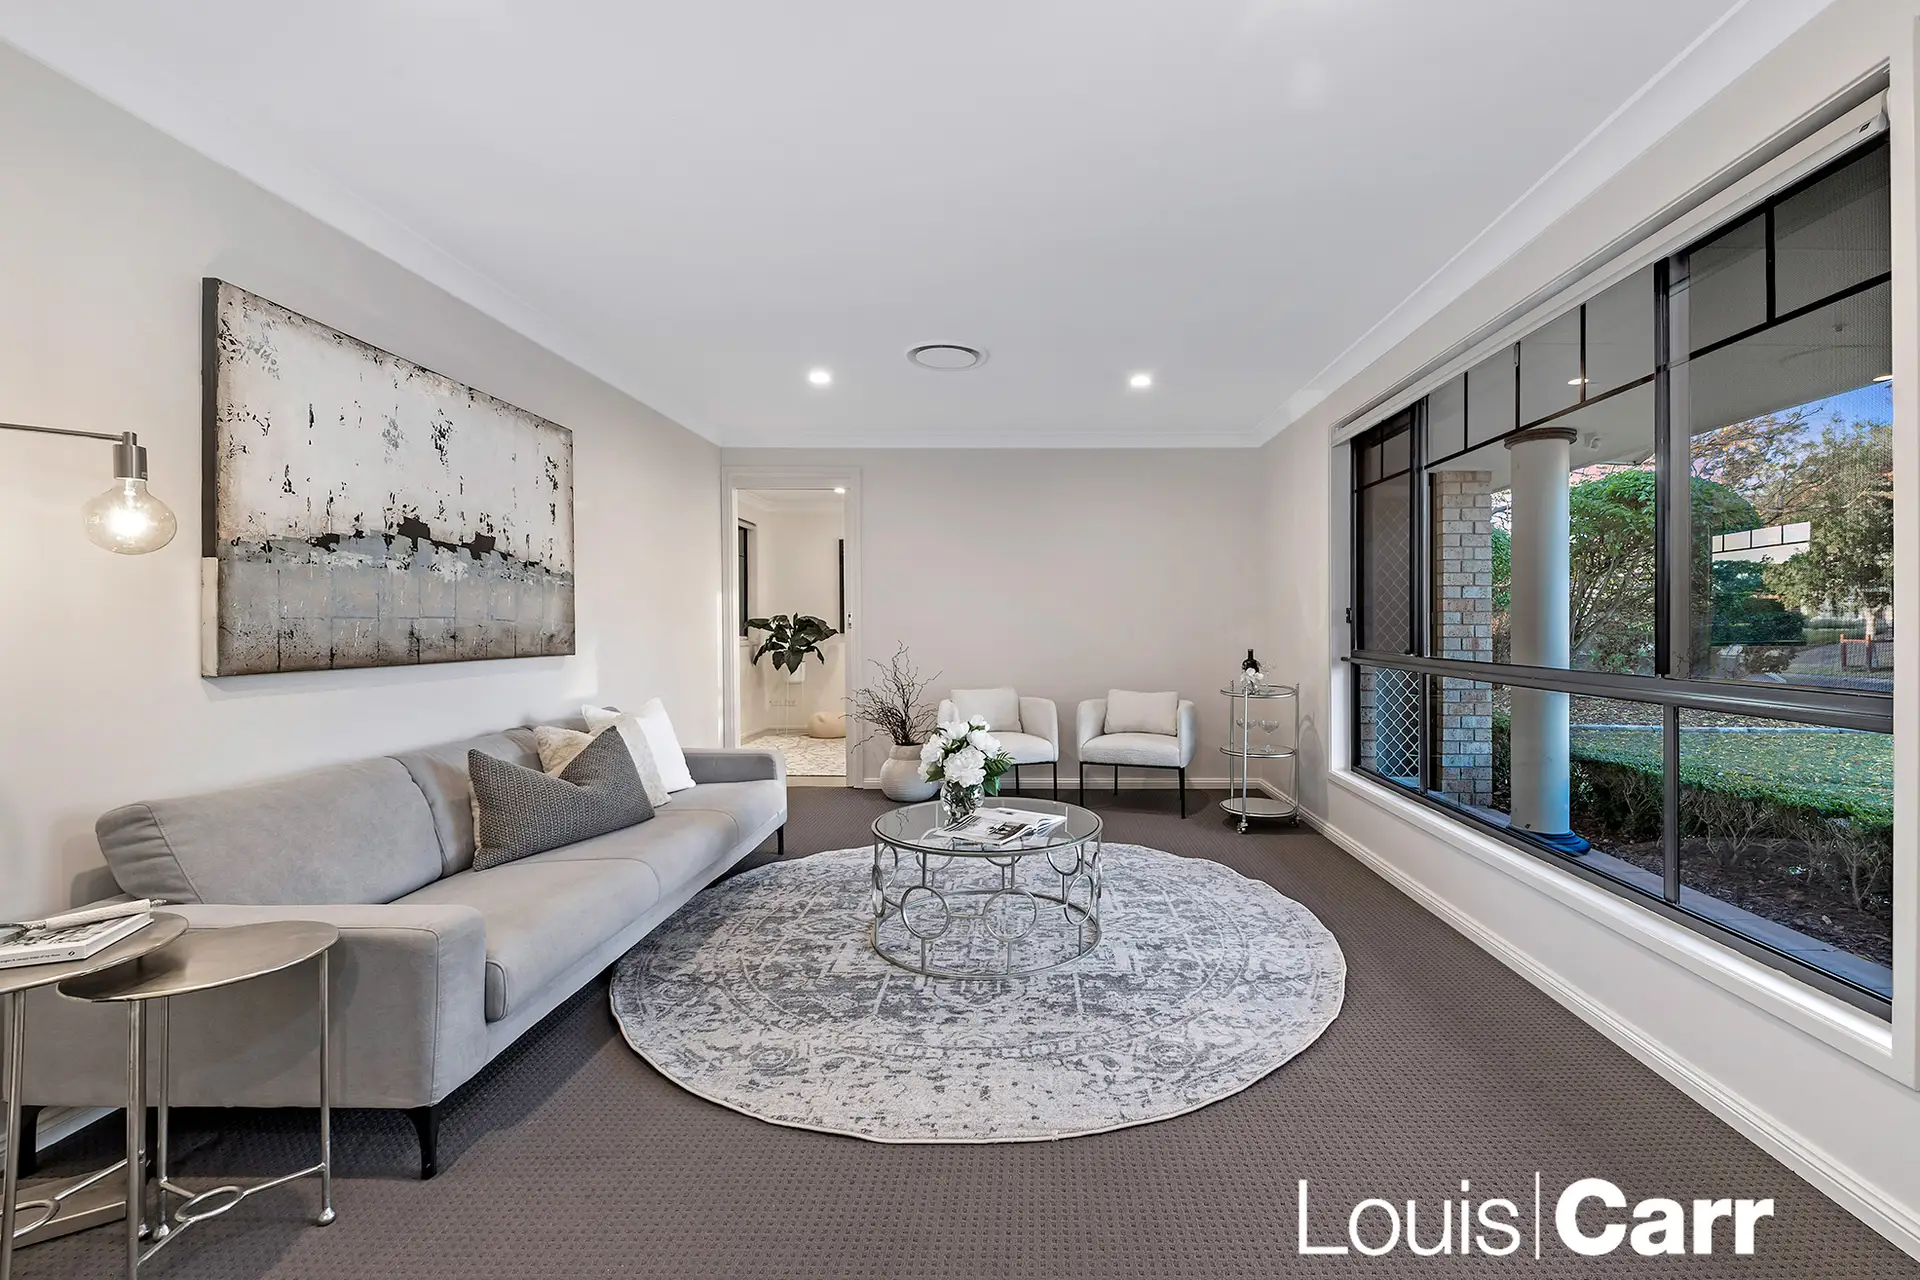 Photo #2: 62 Adelphi Street, Rouse Hill - Sold by Louis Carr Real Estate